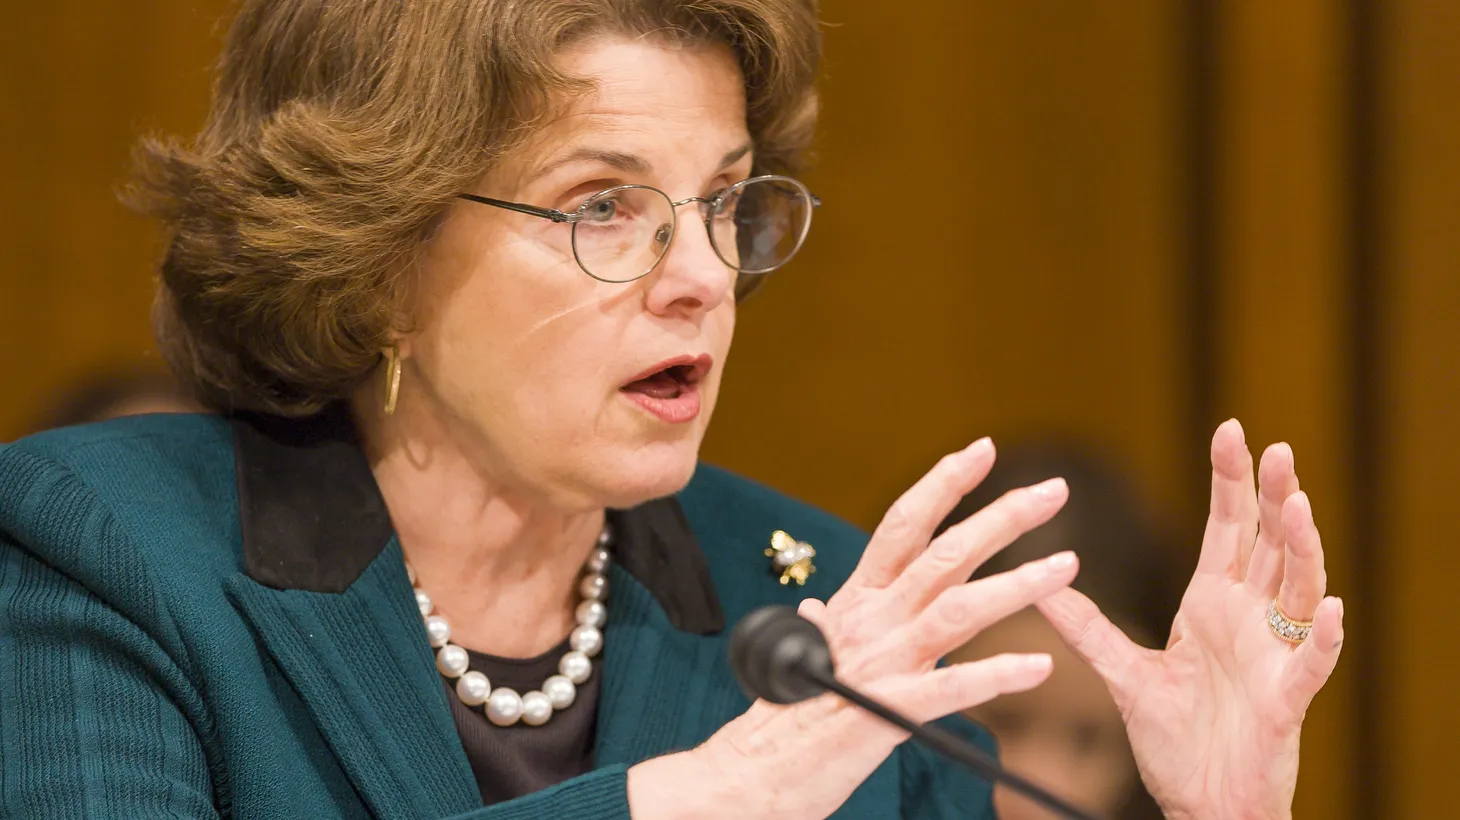 Senator Dianne Feinstein, the oldest sitting senator, speaks during Supreme Court confirmation hearings for Judge Samuel Alito Jr. in 2006. “Every one of these people has deep respect for the senator and … reveres her and recognizes how tremendous her career has been,” says San Francisco Chronicle Washington Correspondent Tal Kopan.